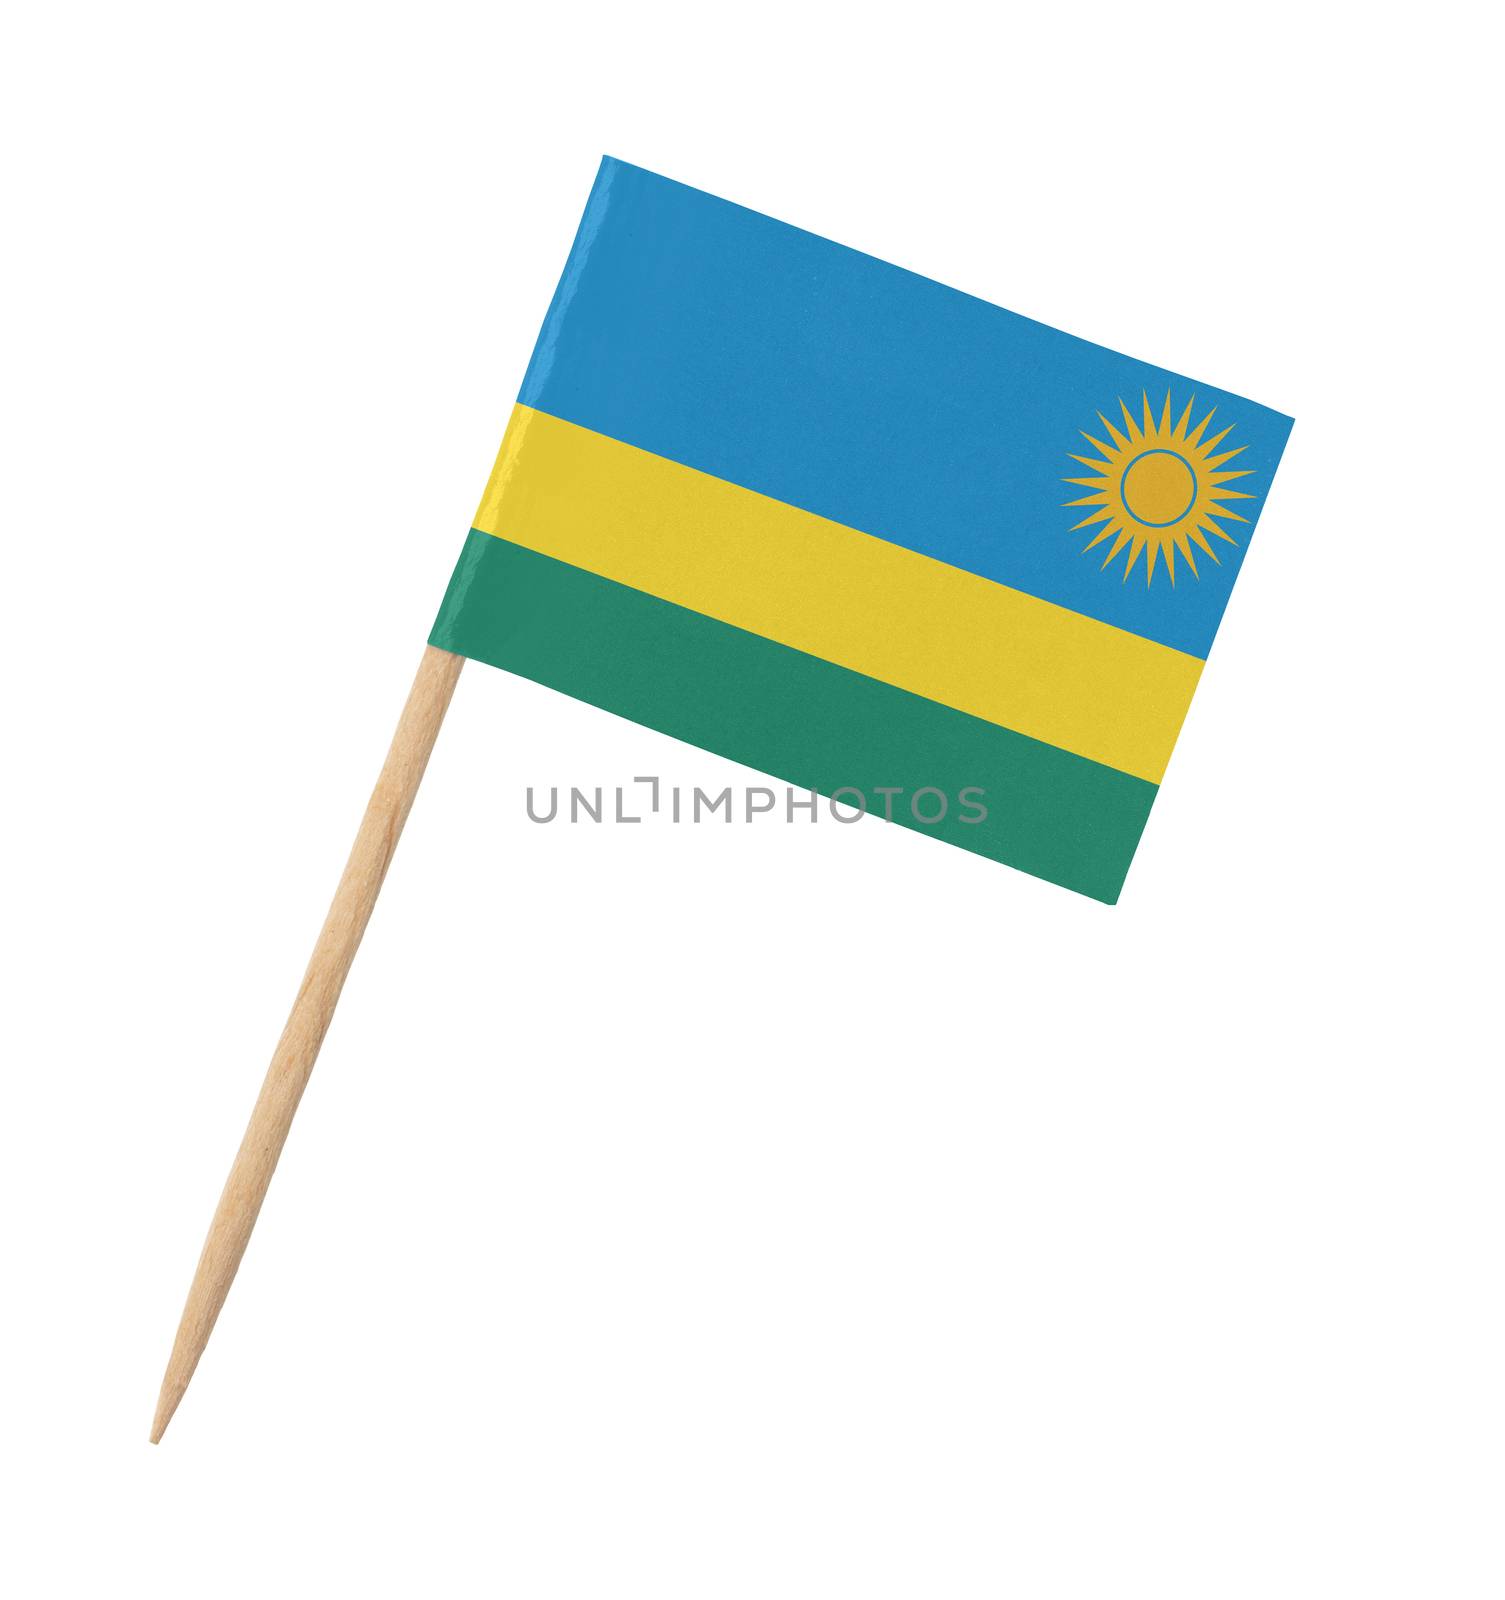 Small paper flag of Rwanda on wooden stick, isolated on white